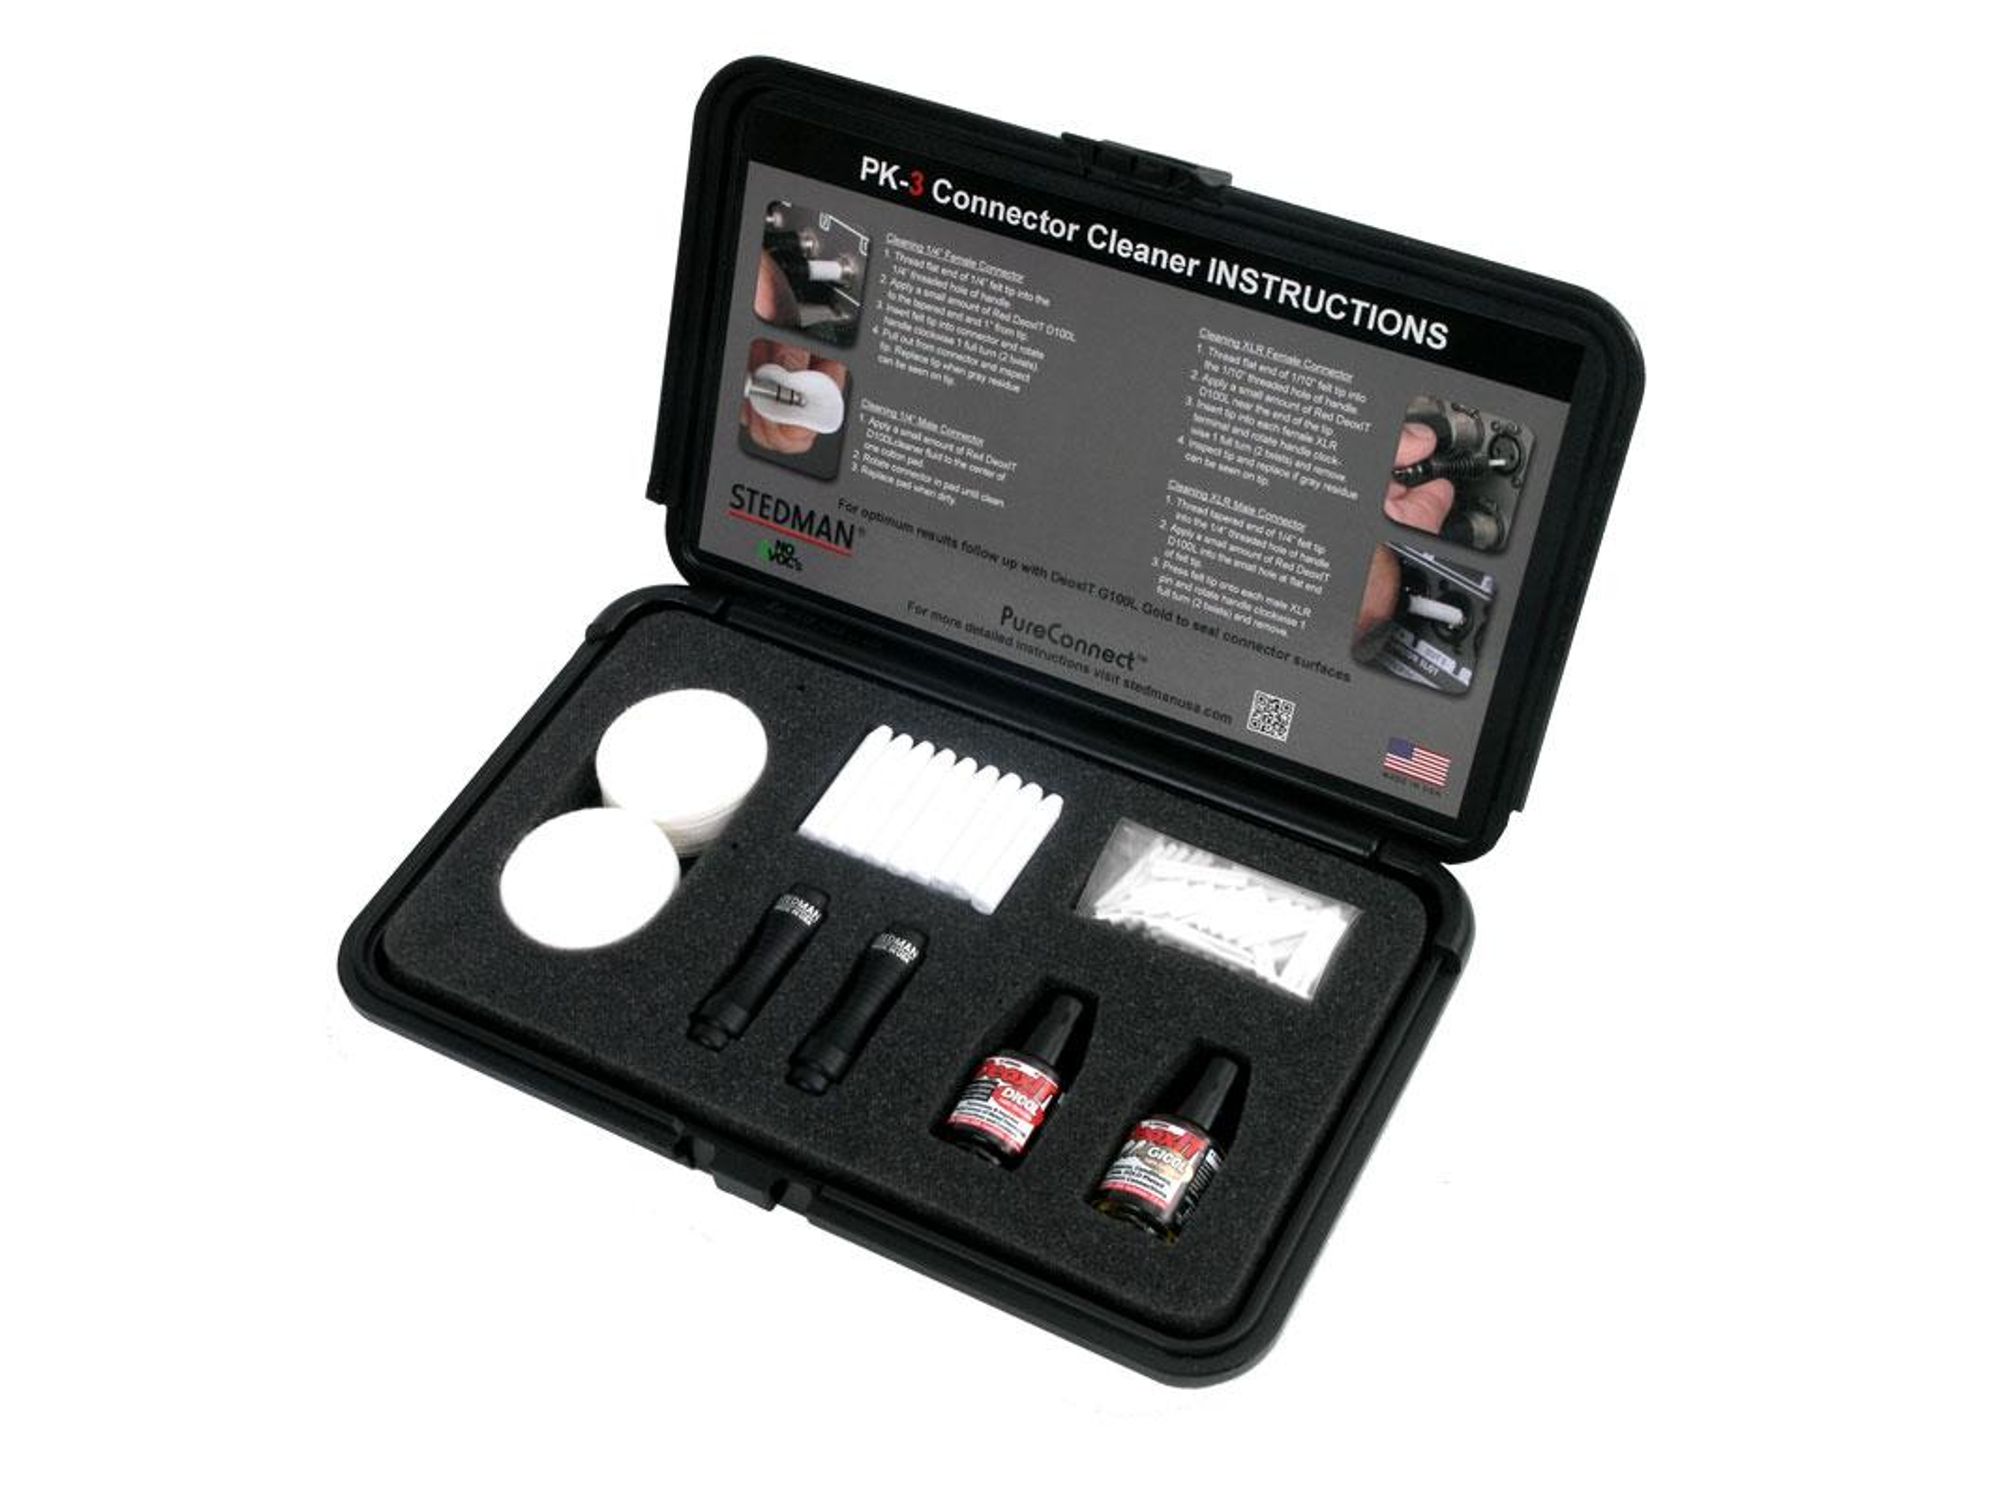 Stedman Introduces PureConnect Cleaning Kits